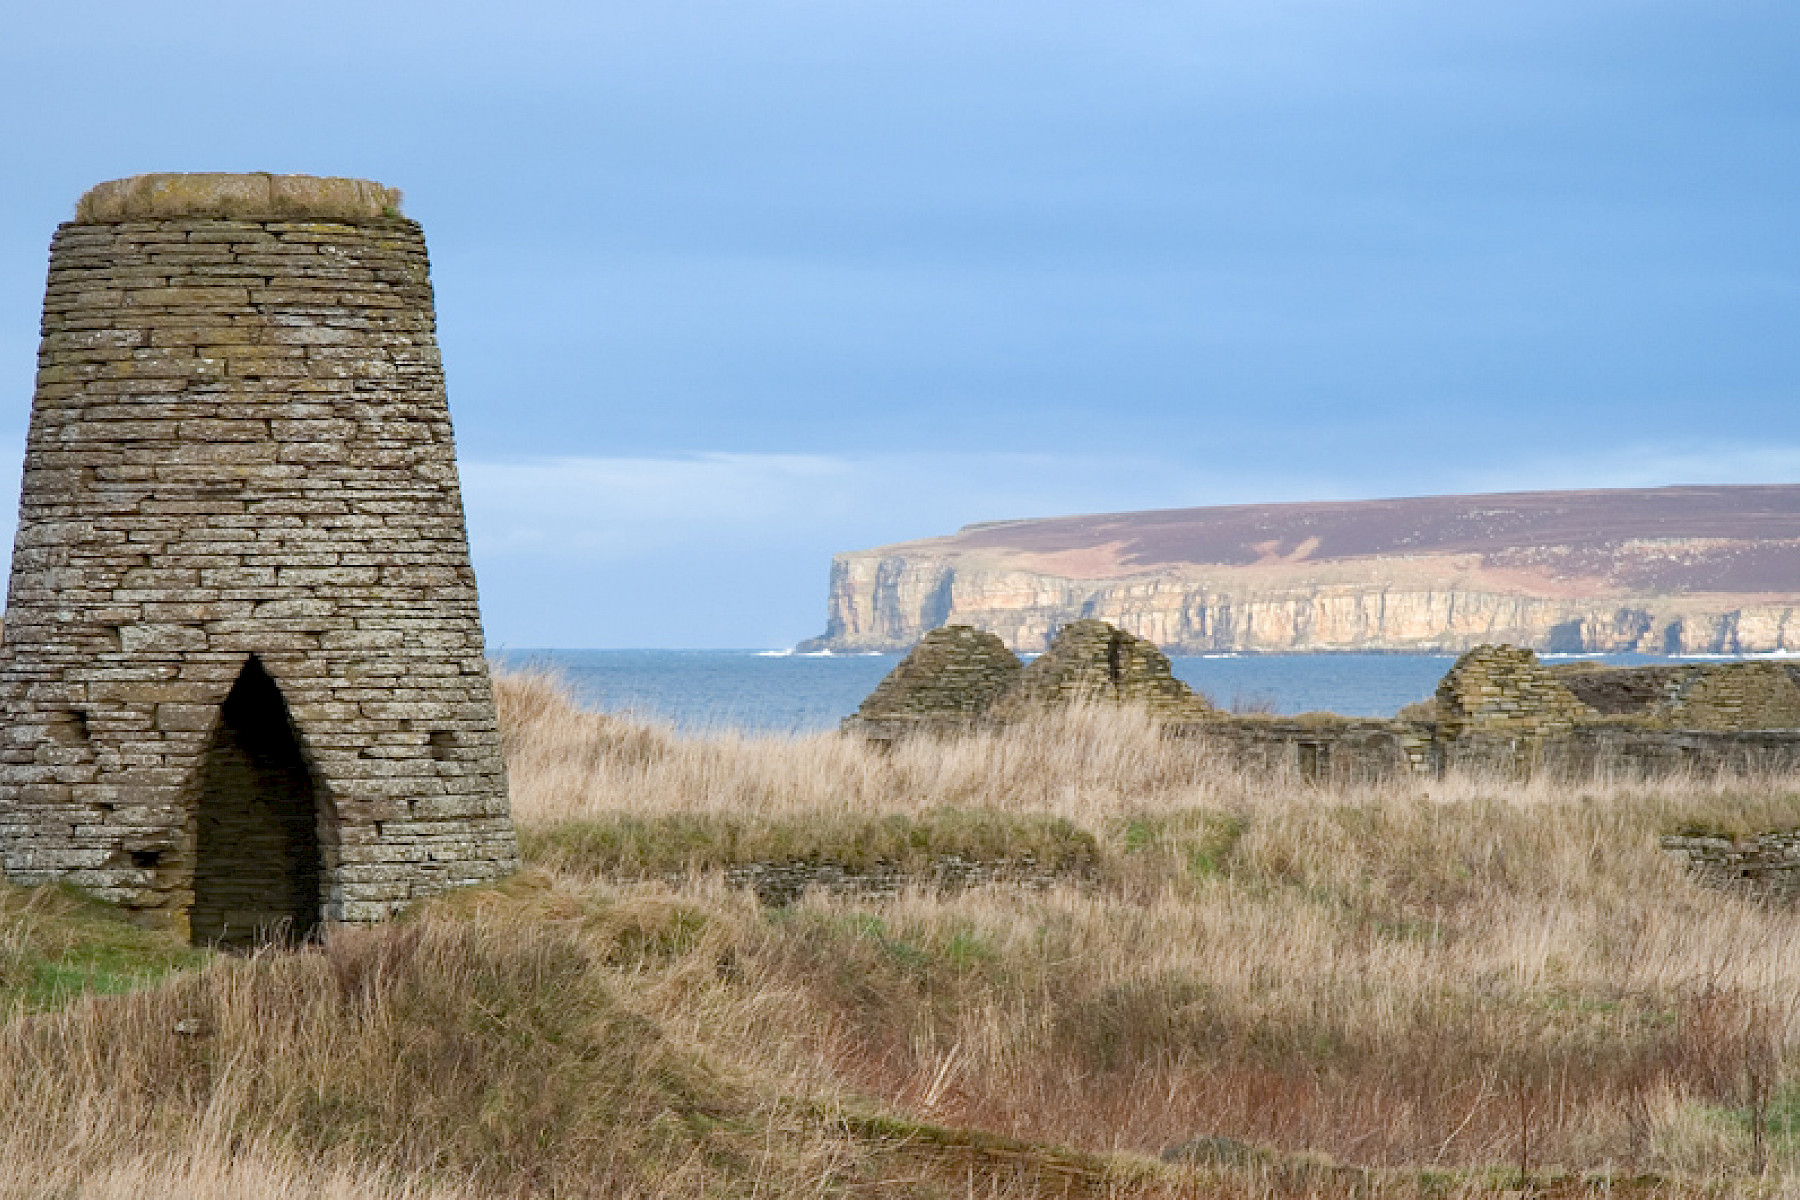 Castletown image: Stone tower monument with a small door stands on an open cliff top with distant headland and blue sea in the background.